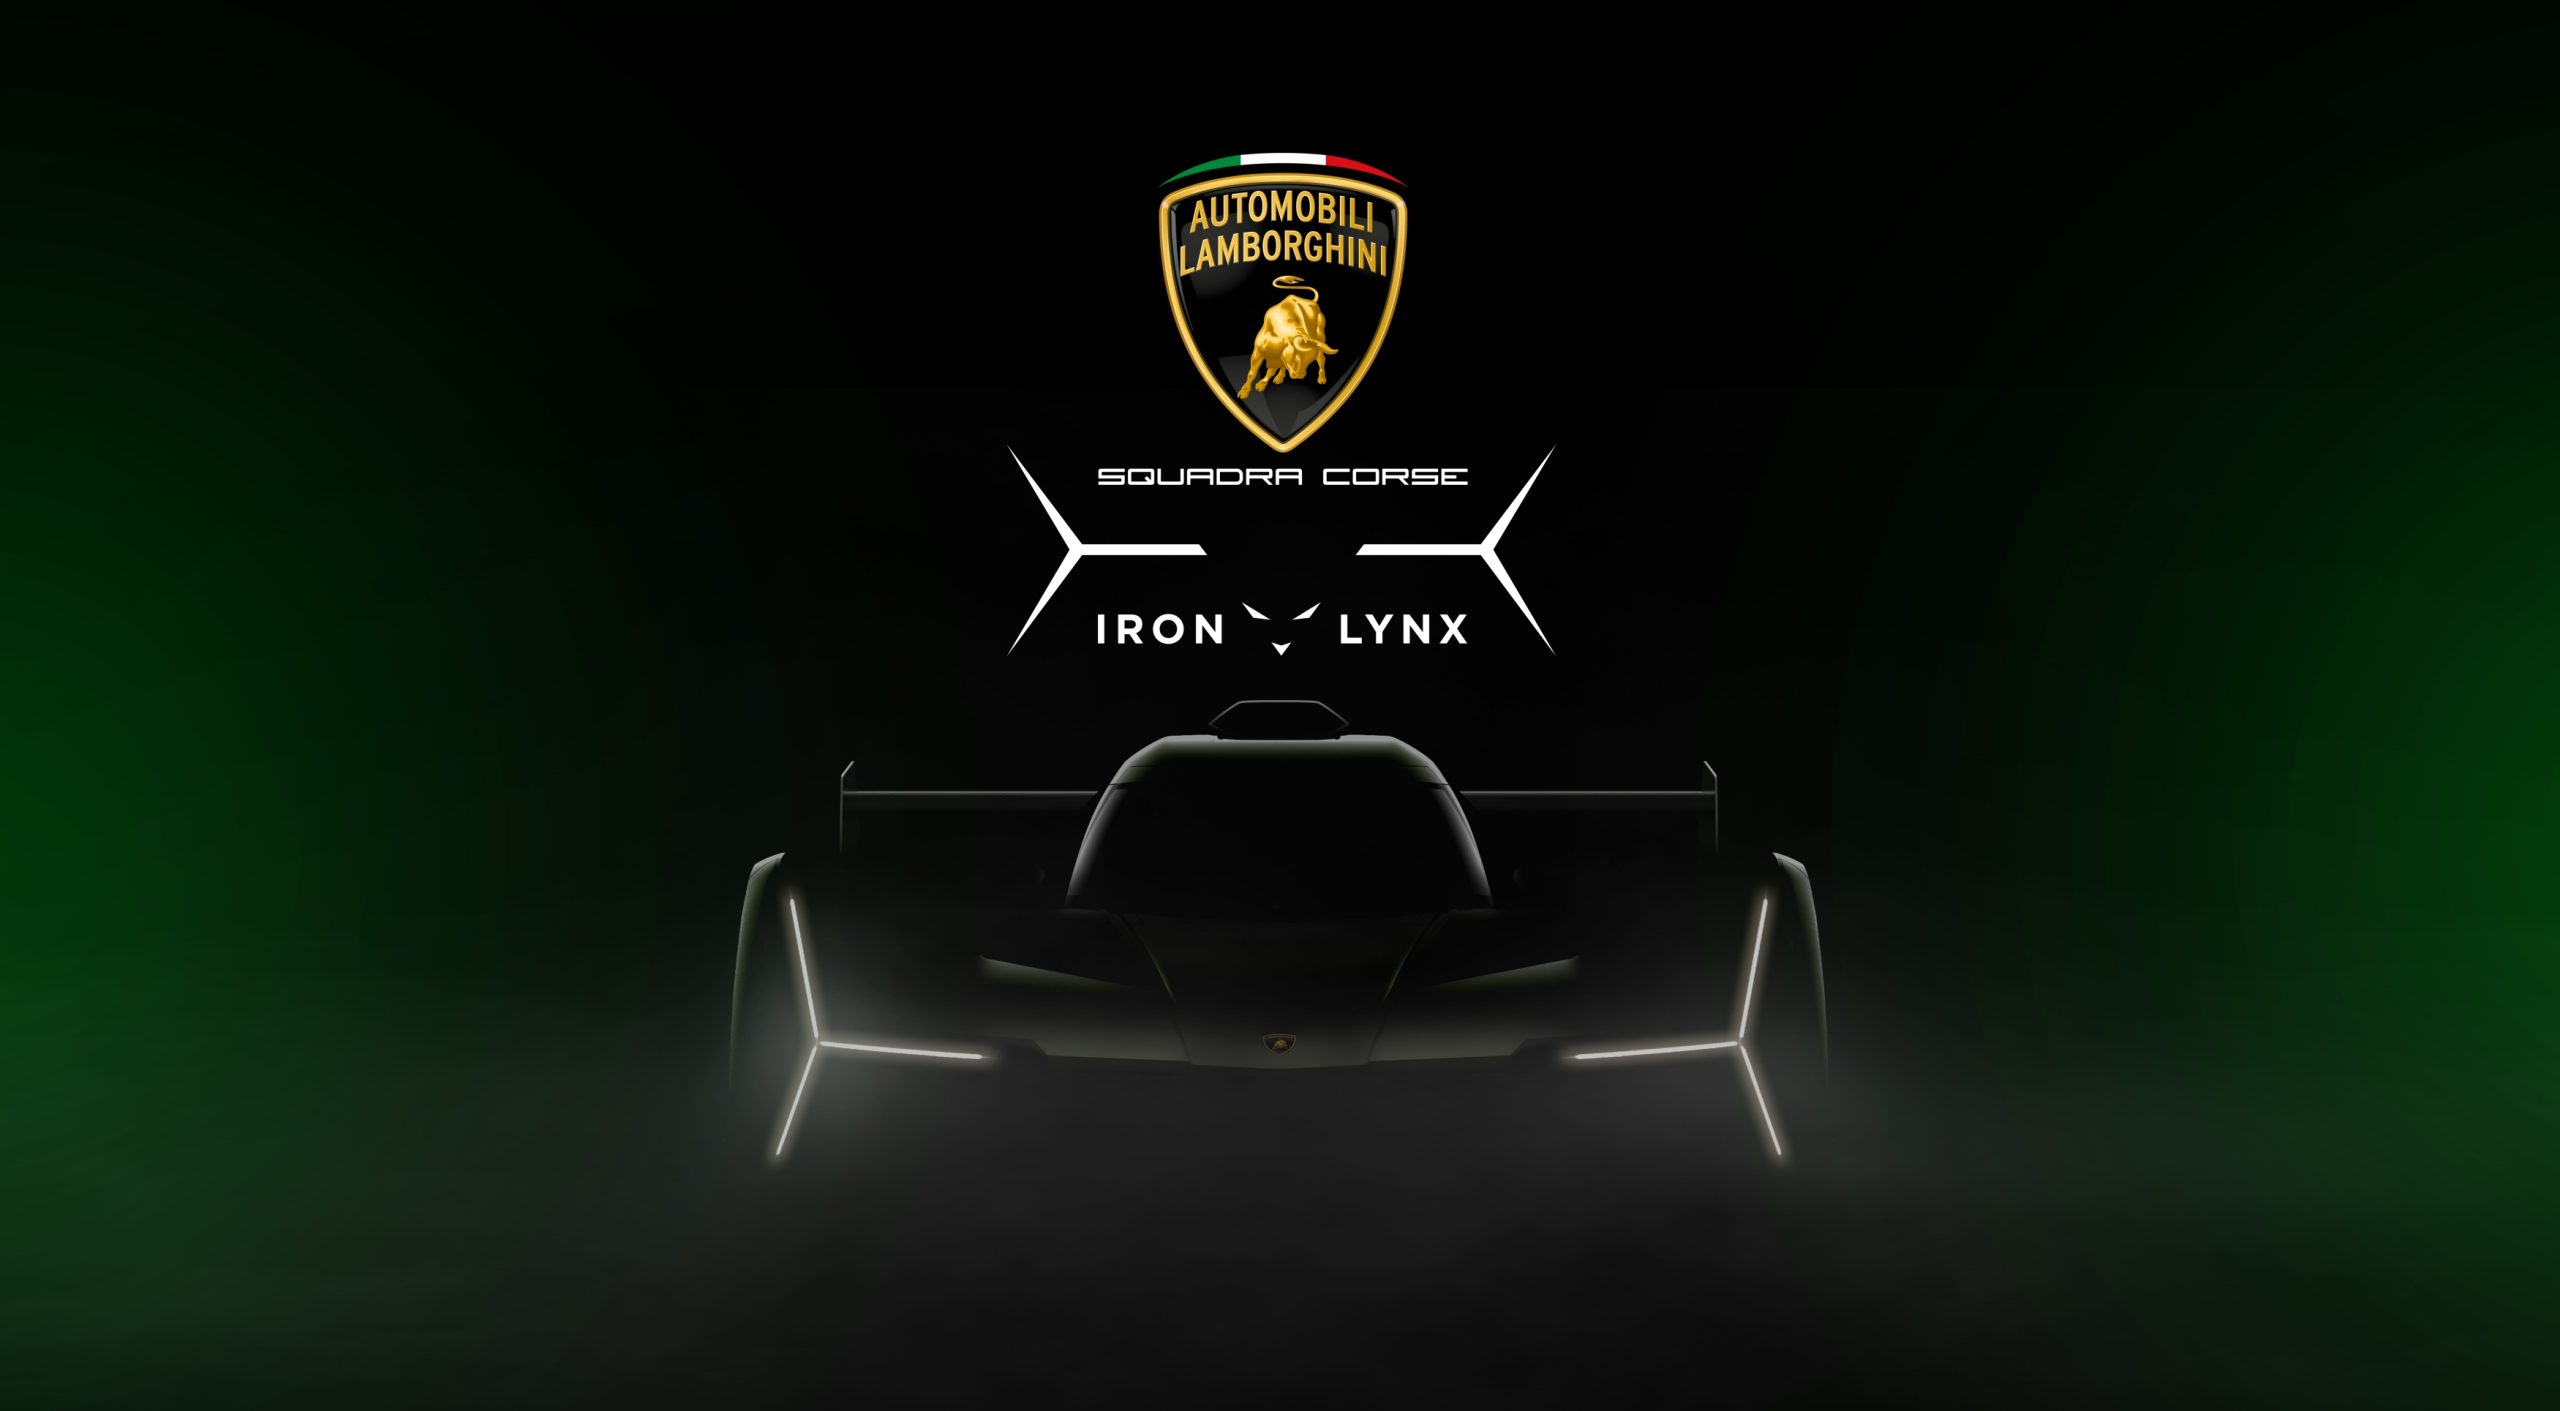 Final teaser released for Lamborghini race car before its anticipated debut at Goodwood